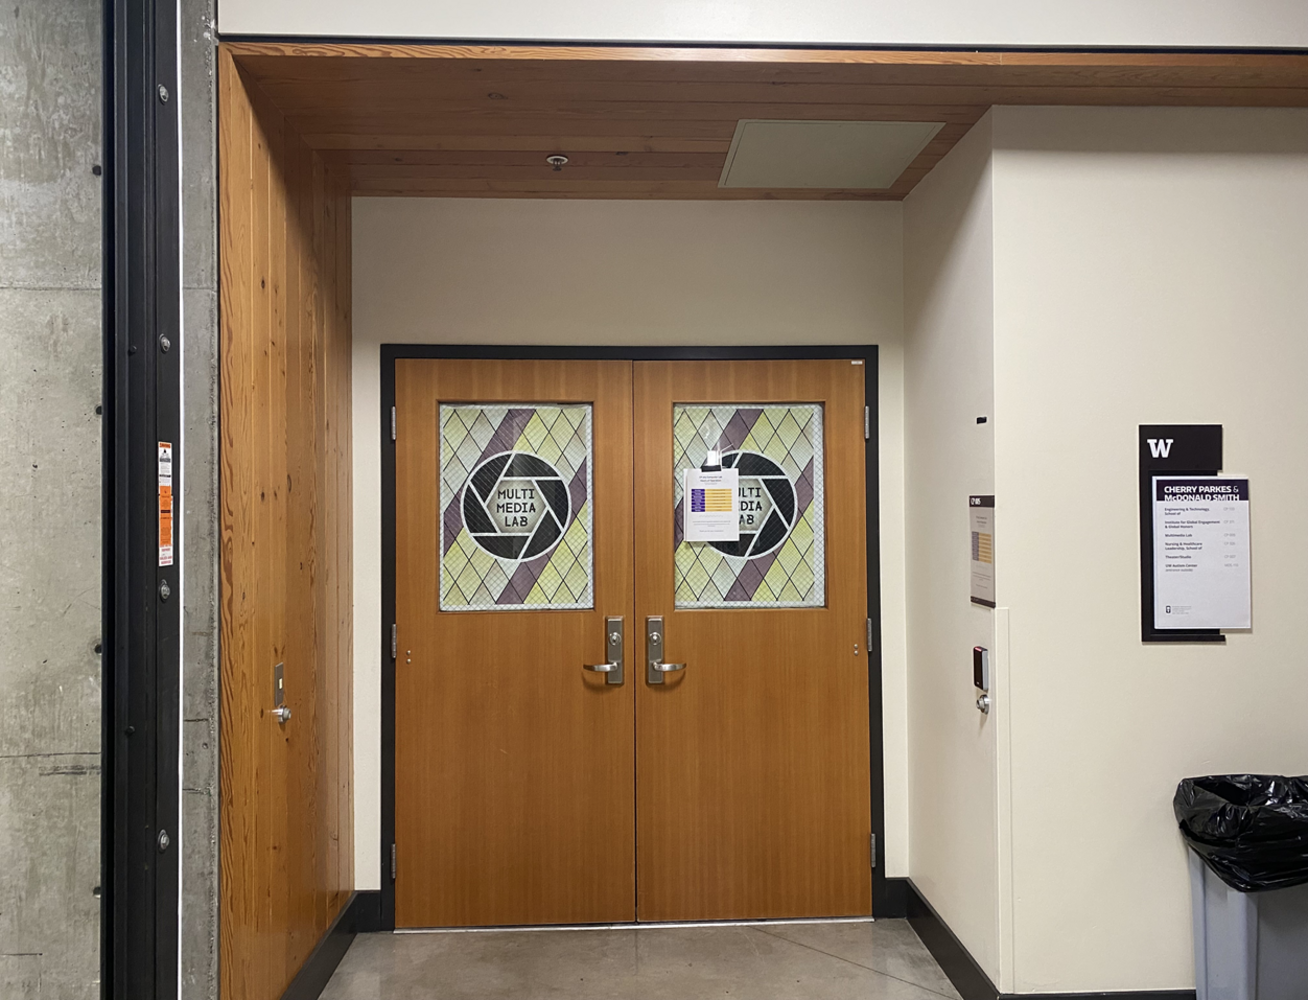 entry way to the computer lab area